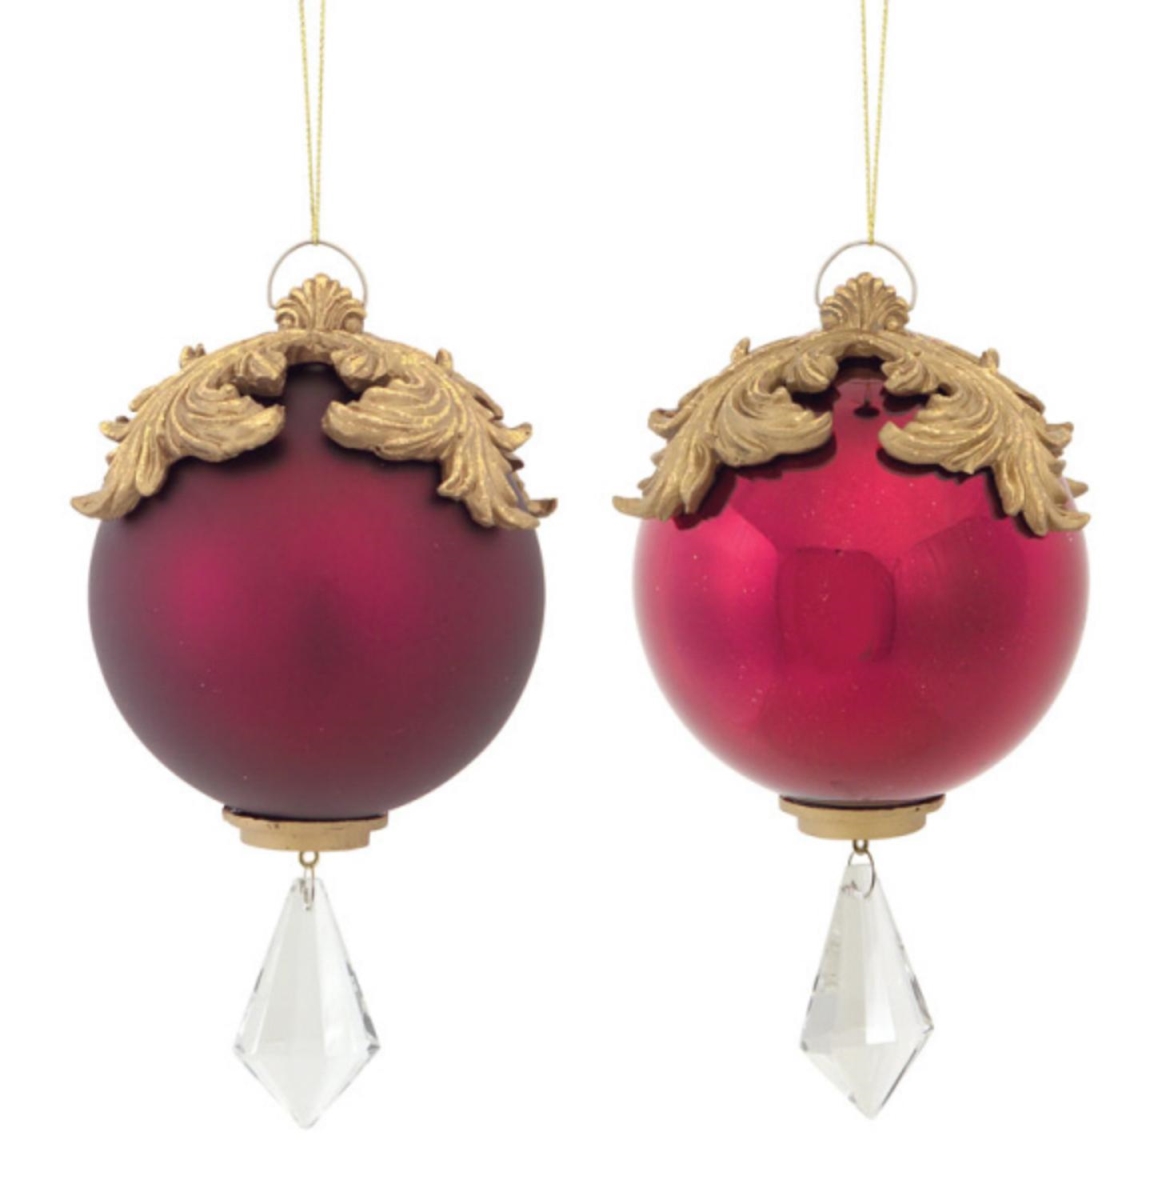 31465565 6.5 In. Red & Gold Raised Acanthus Leaf With Clear Jewel Dangle Christmas Ornament, Set Of 2